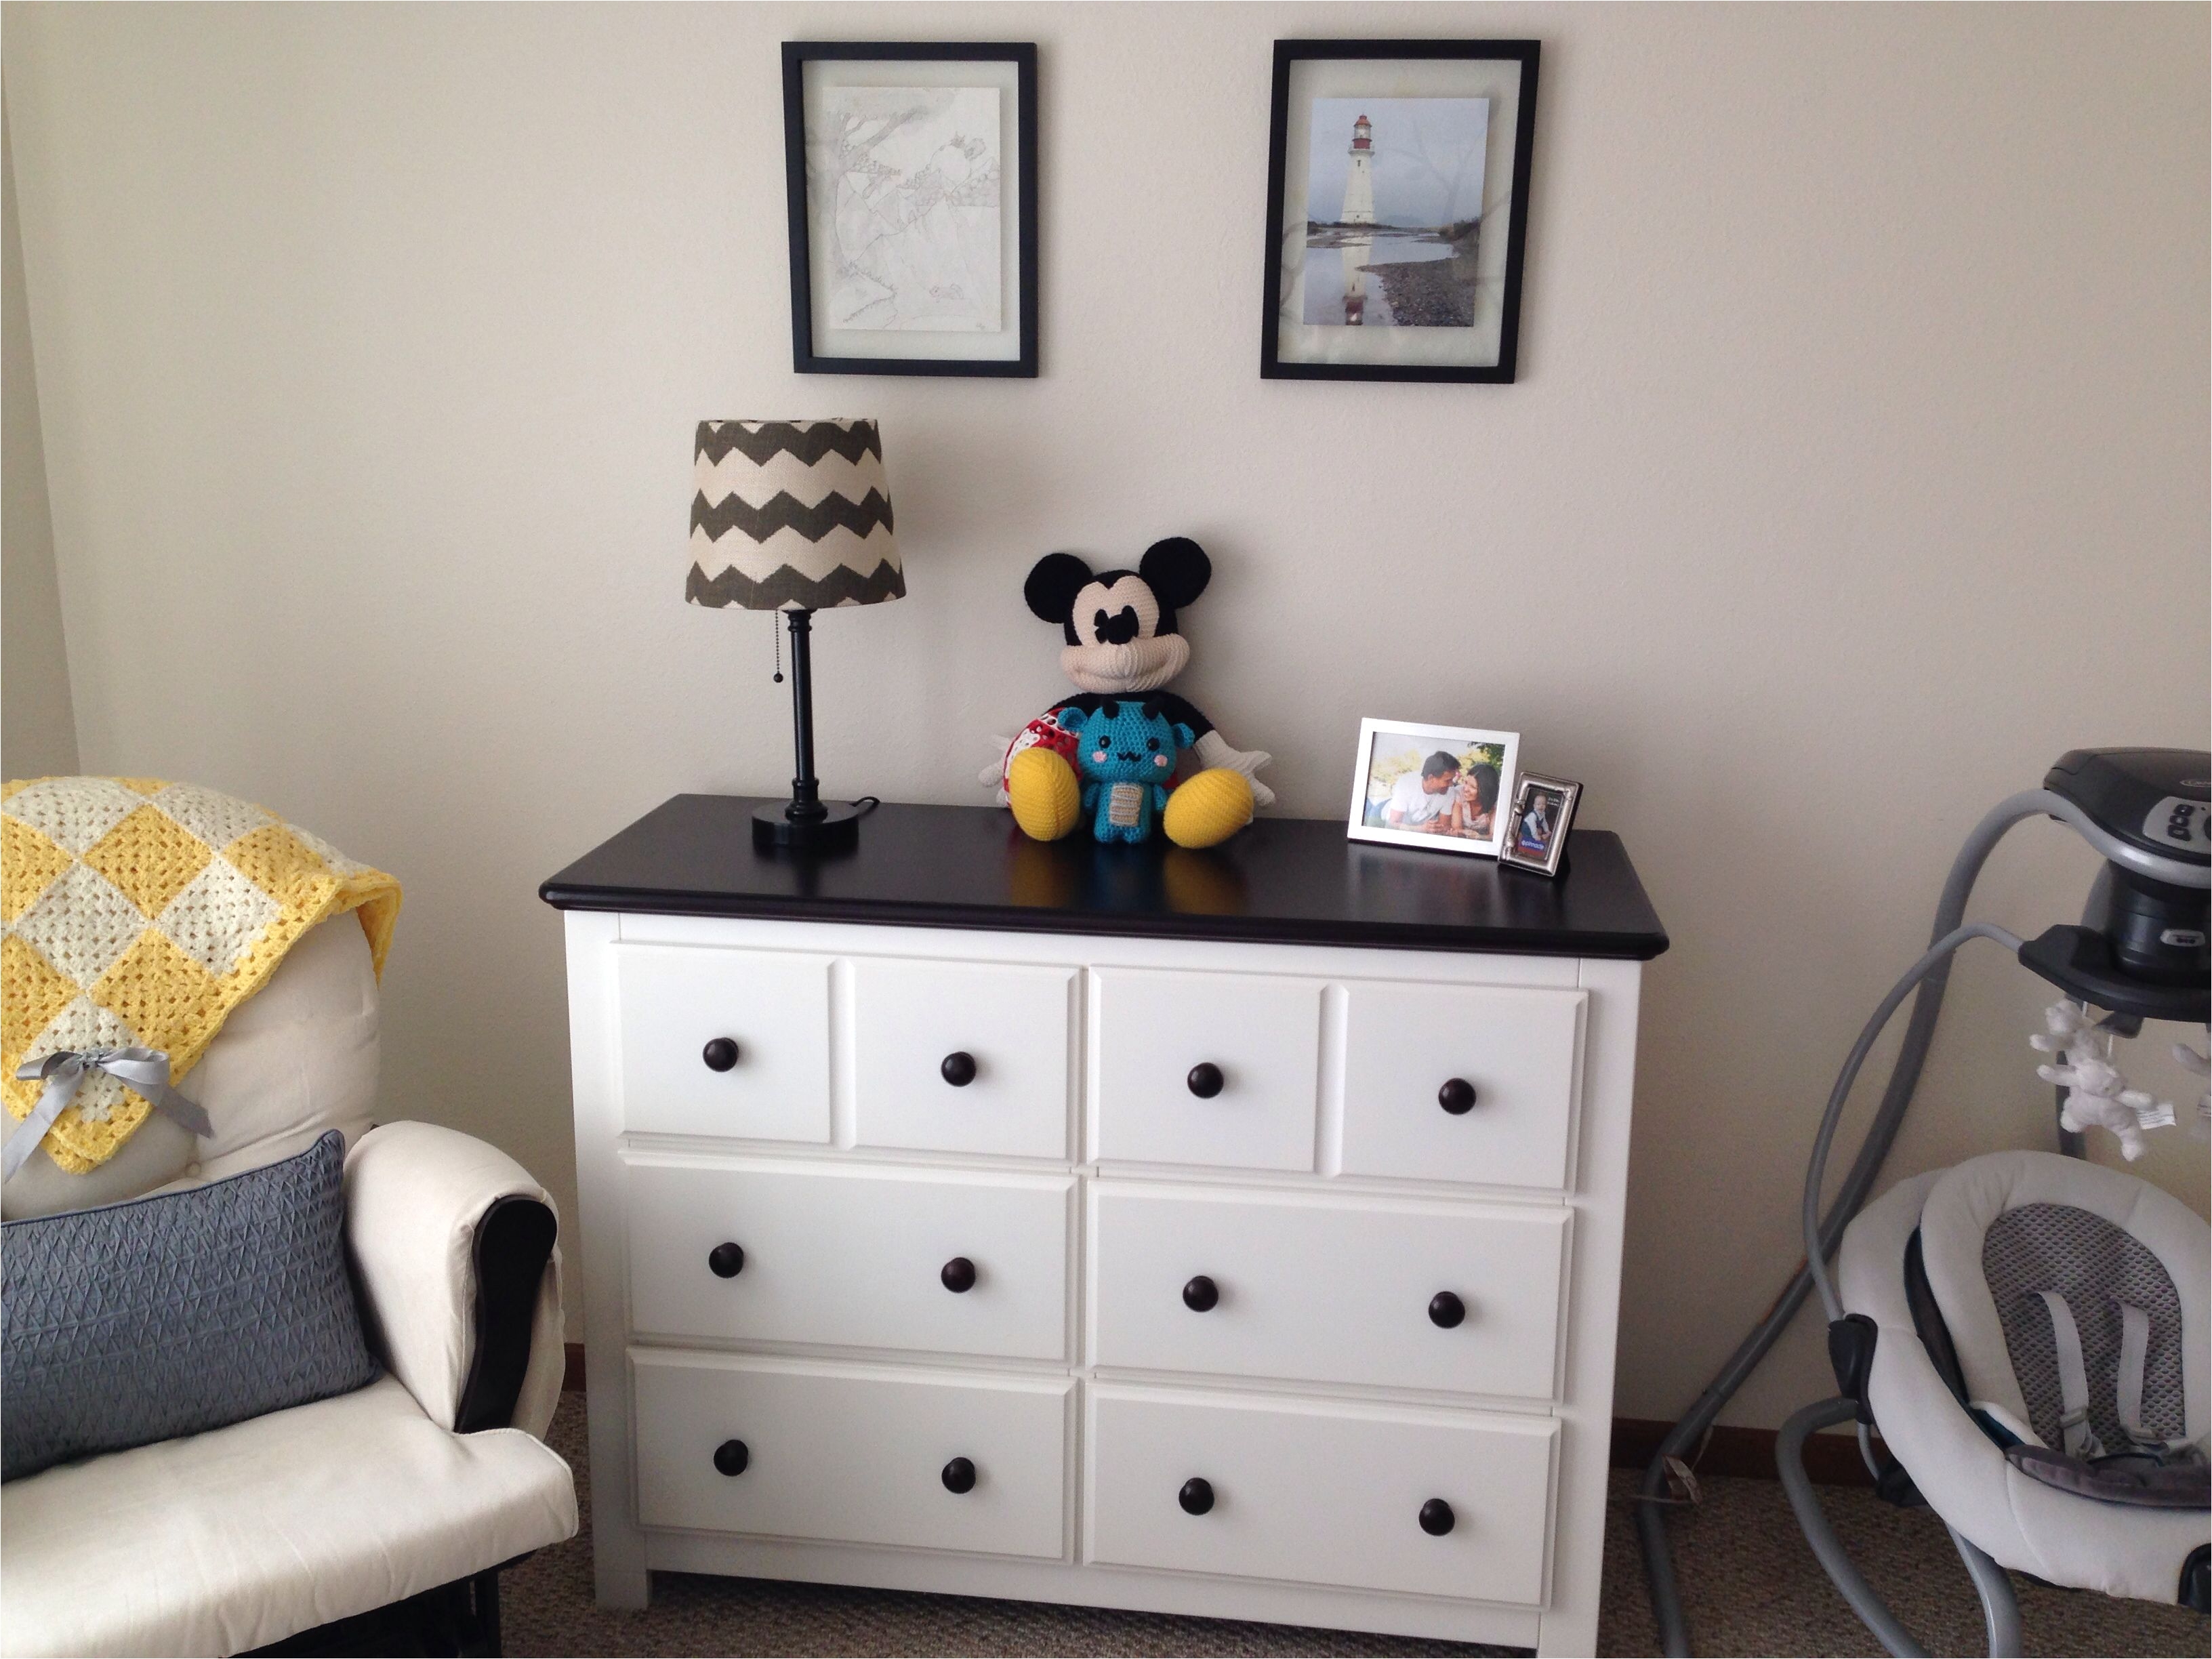 glider and ottoman from burlington coat factory dresser from babies